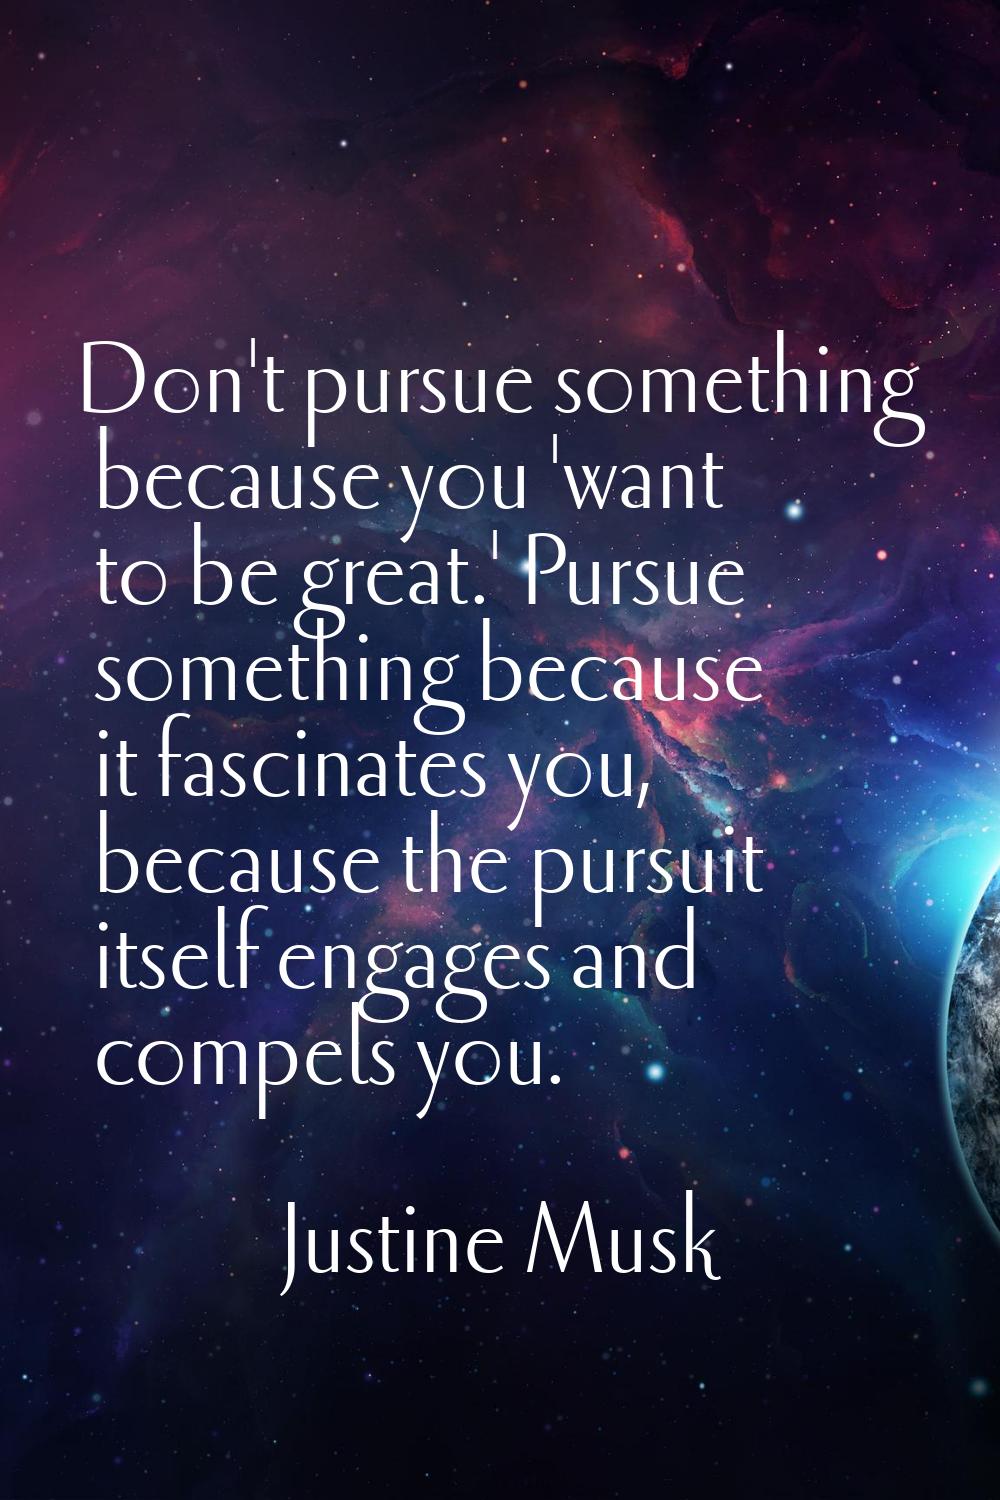 Don't pursue something because you 'want to be great.' Pursue something because it fascinates you, 